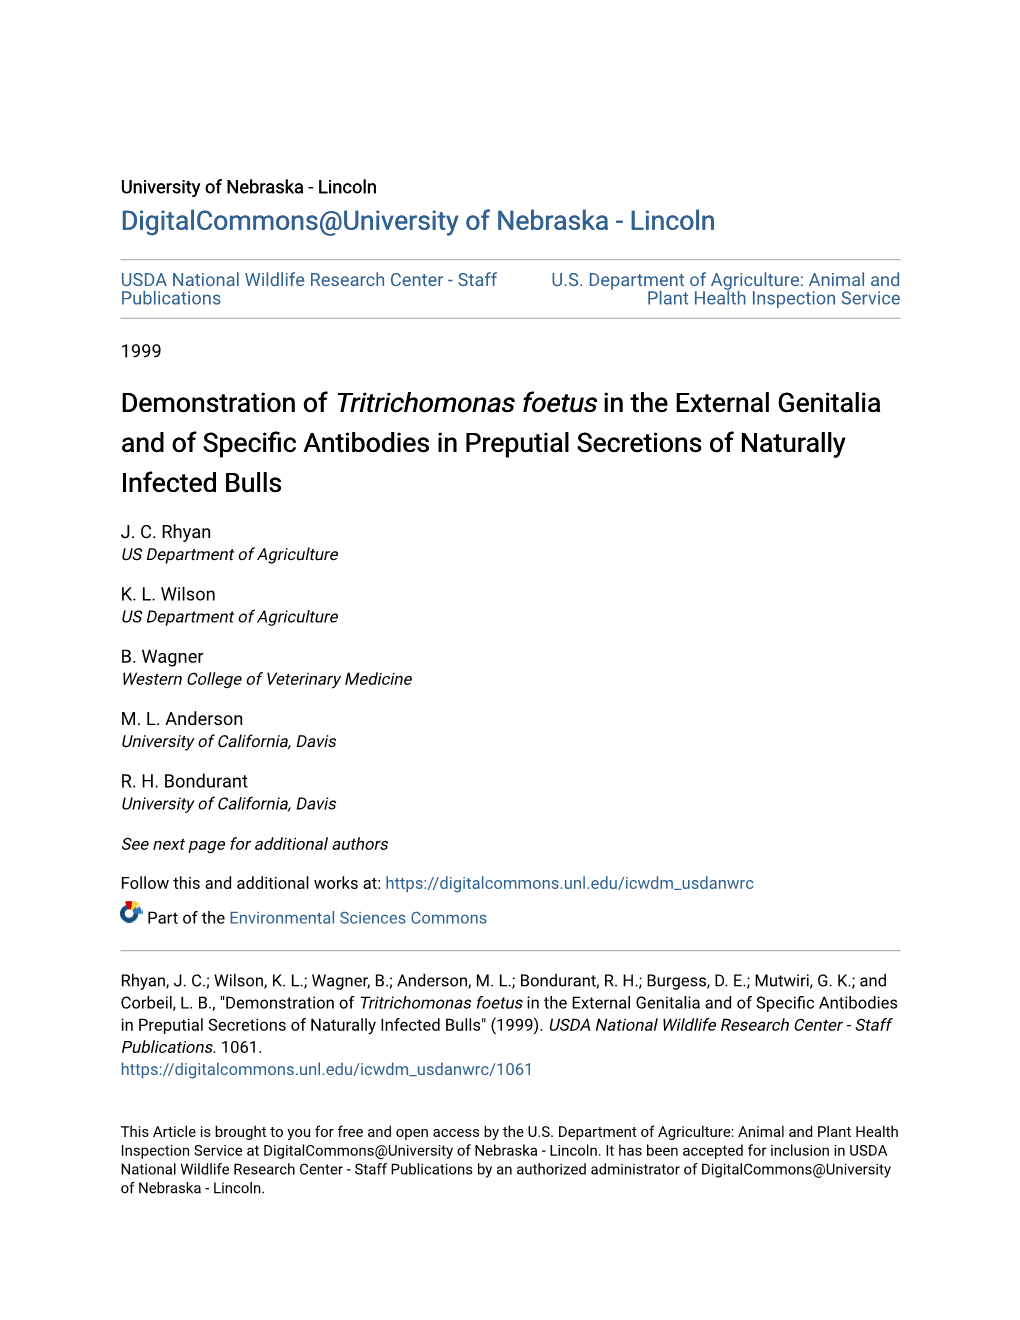 Demonstration of Tritrichomonas Foetus in the External Genitalia and of Specific Antibodies in Preputial Secretions of Naturally Infected Bulls